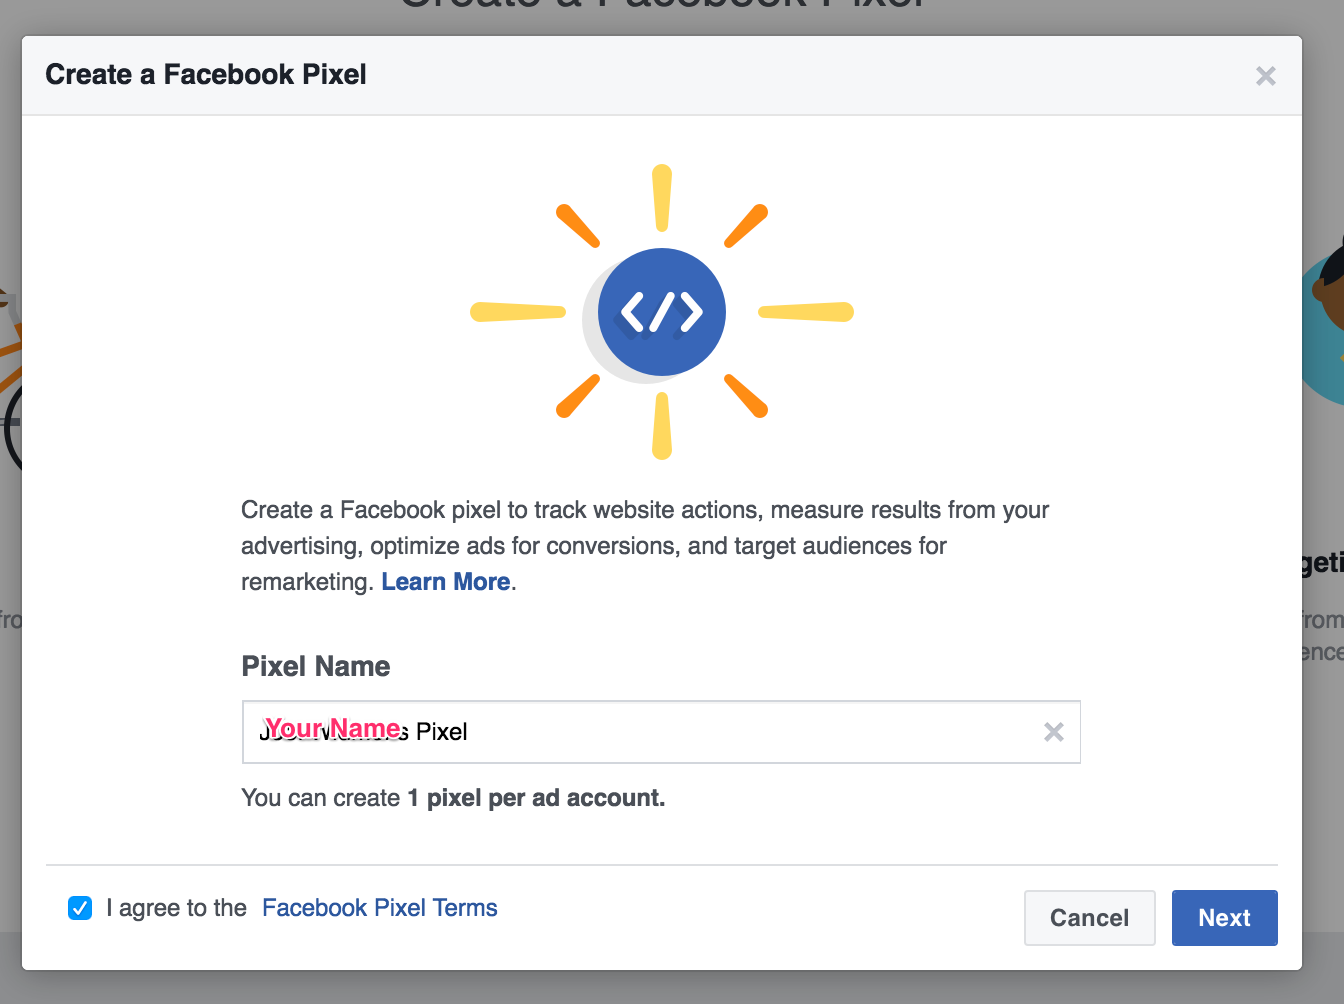 how to install facebook pixel